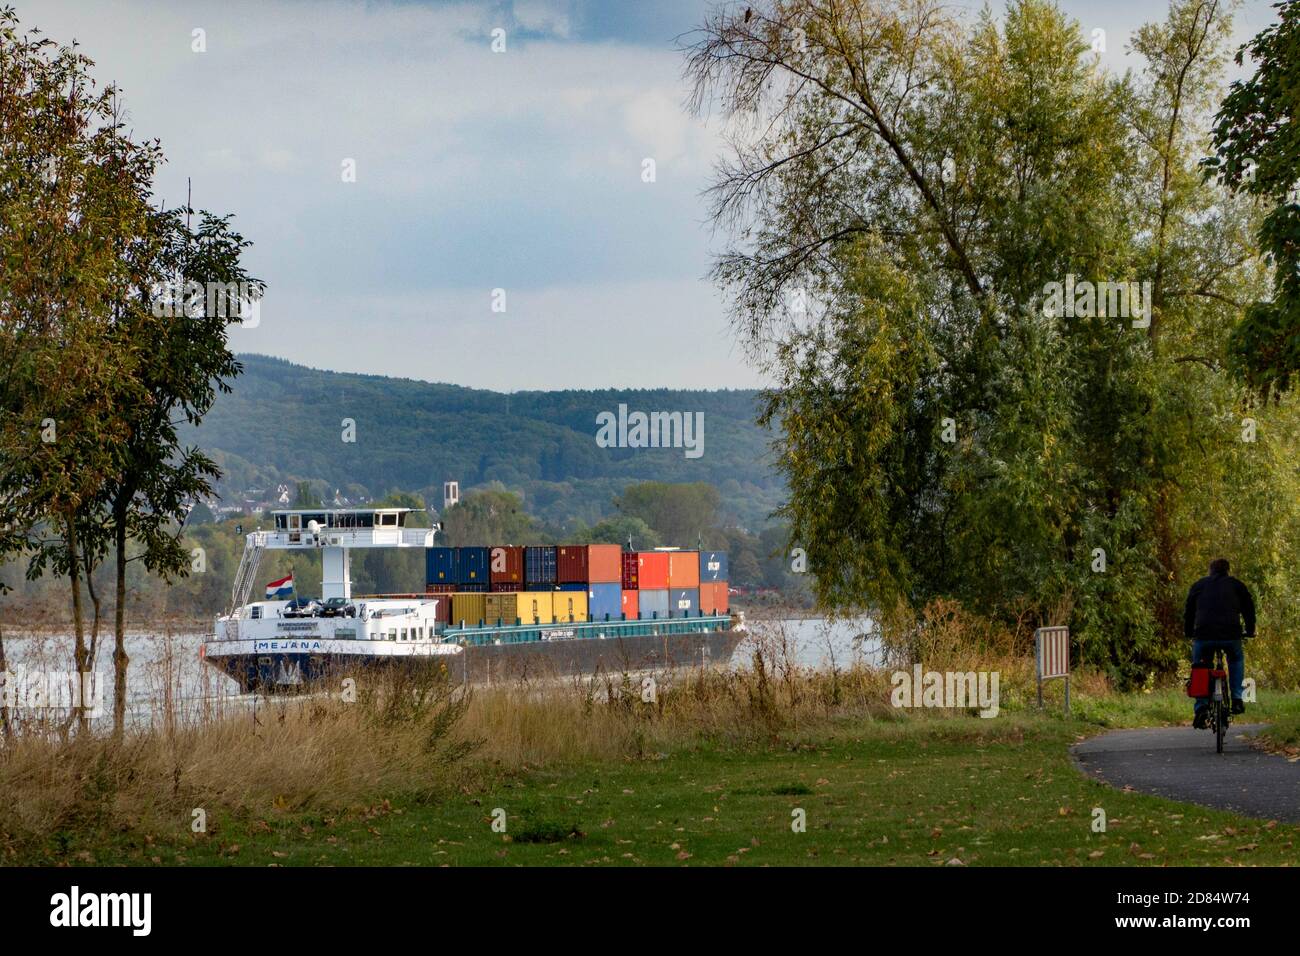 GERMANY, Bonn, Northrhine Westfalia, Cargo ship with containers navigating the River Rhine, which is lined by a popular bycicle path for h Stock Photo